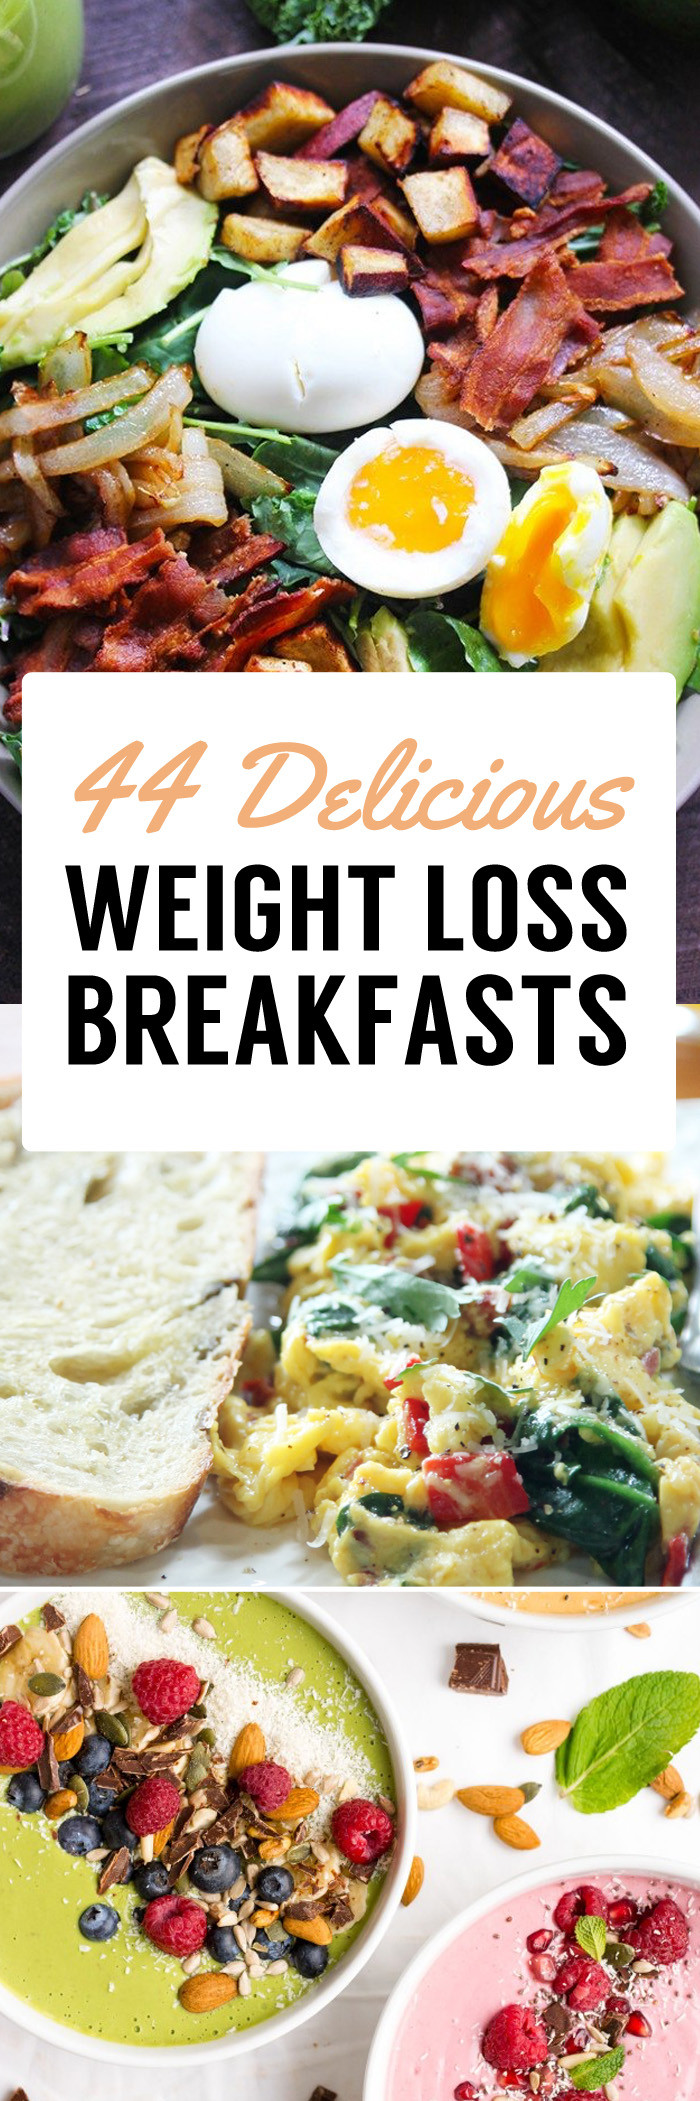 Healthy Weight Loss Recipes
 44 Weight Loss Breakfast Recipes To Jumpstart Your Fat